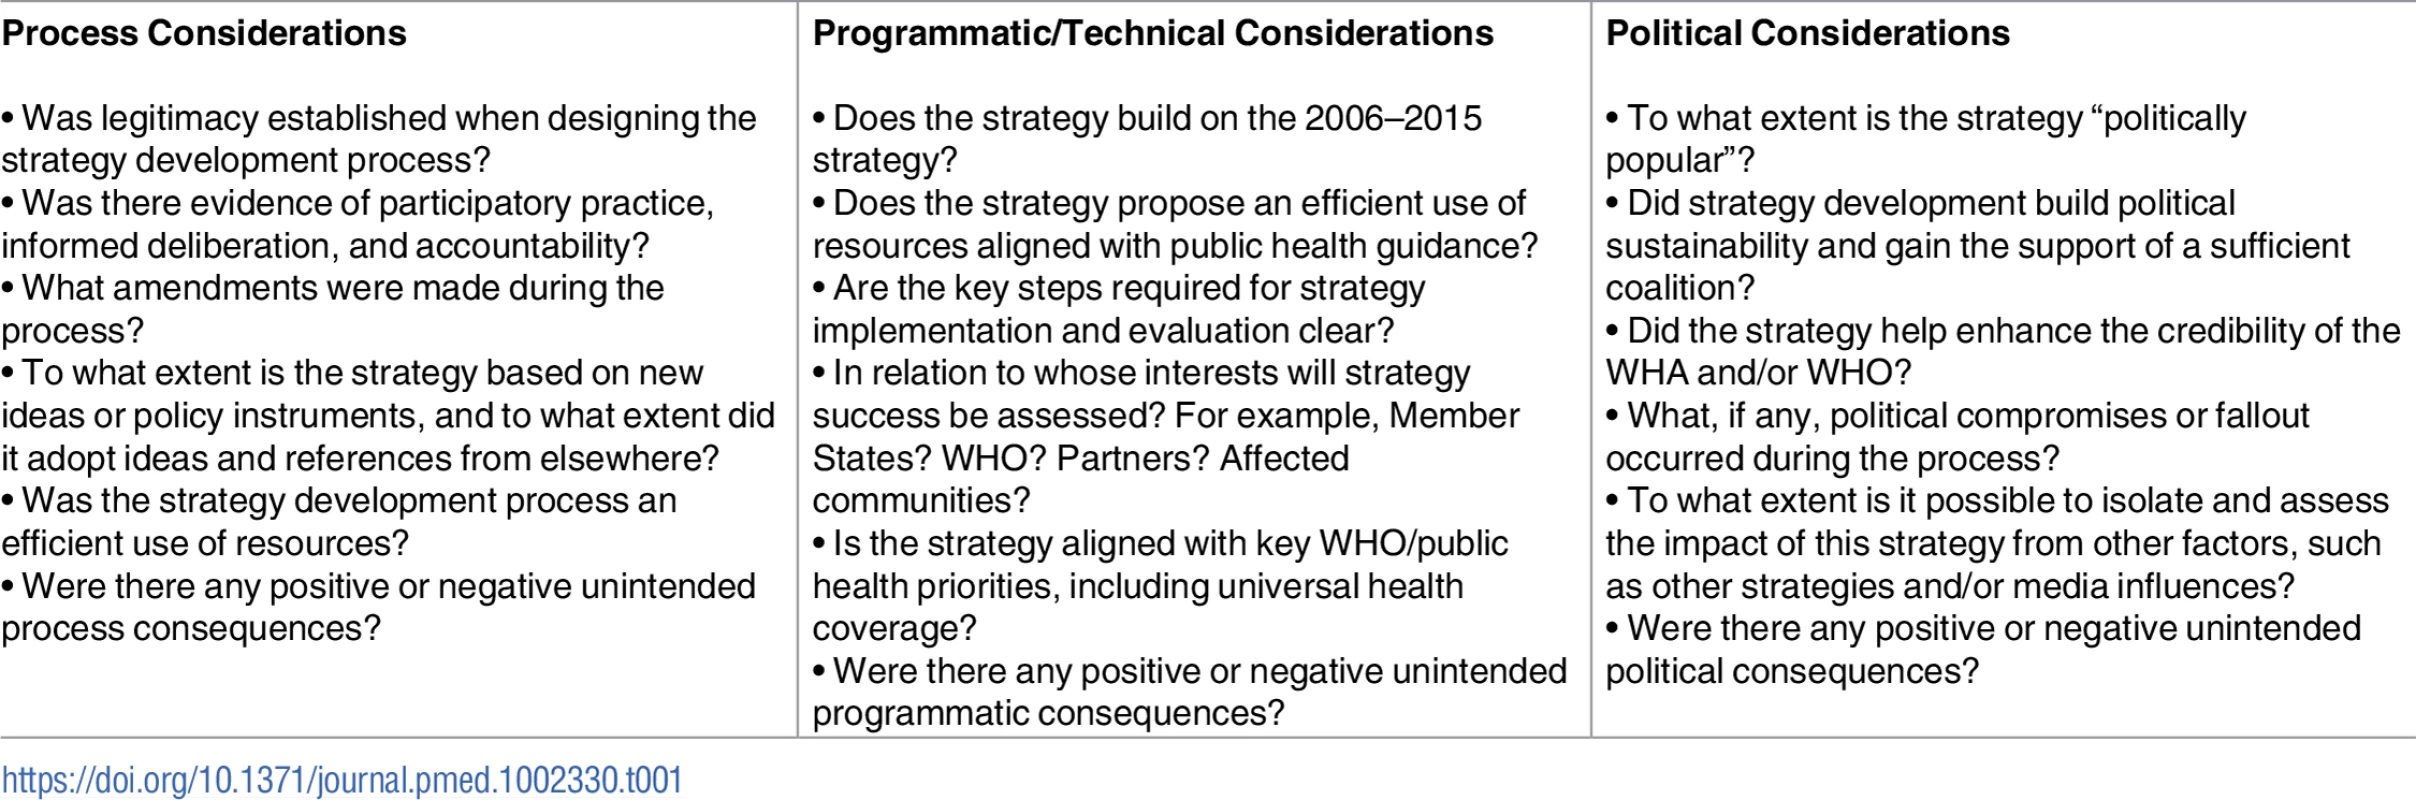 Evaluation questions adapted from the 9 indicators proposed by Marsh and McConnell’s &lt;i&gt;A framework for establishing policy success&lt;/i&gt;.